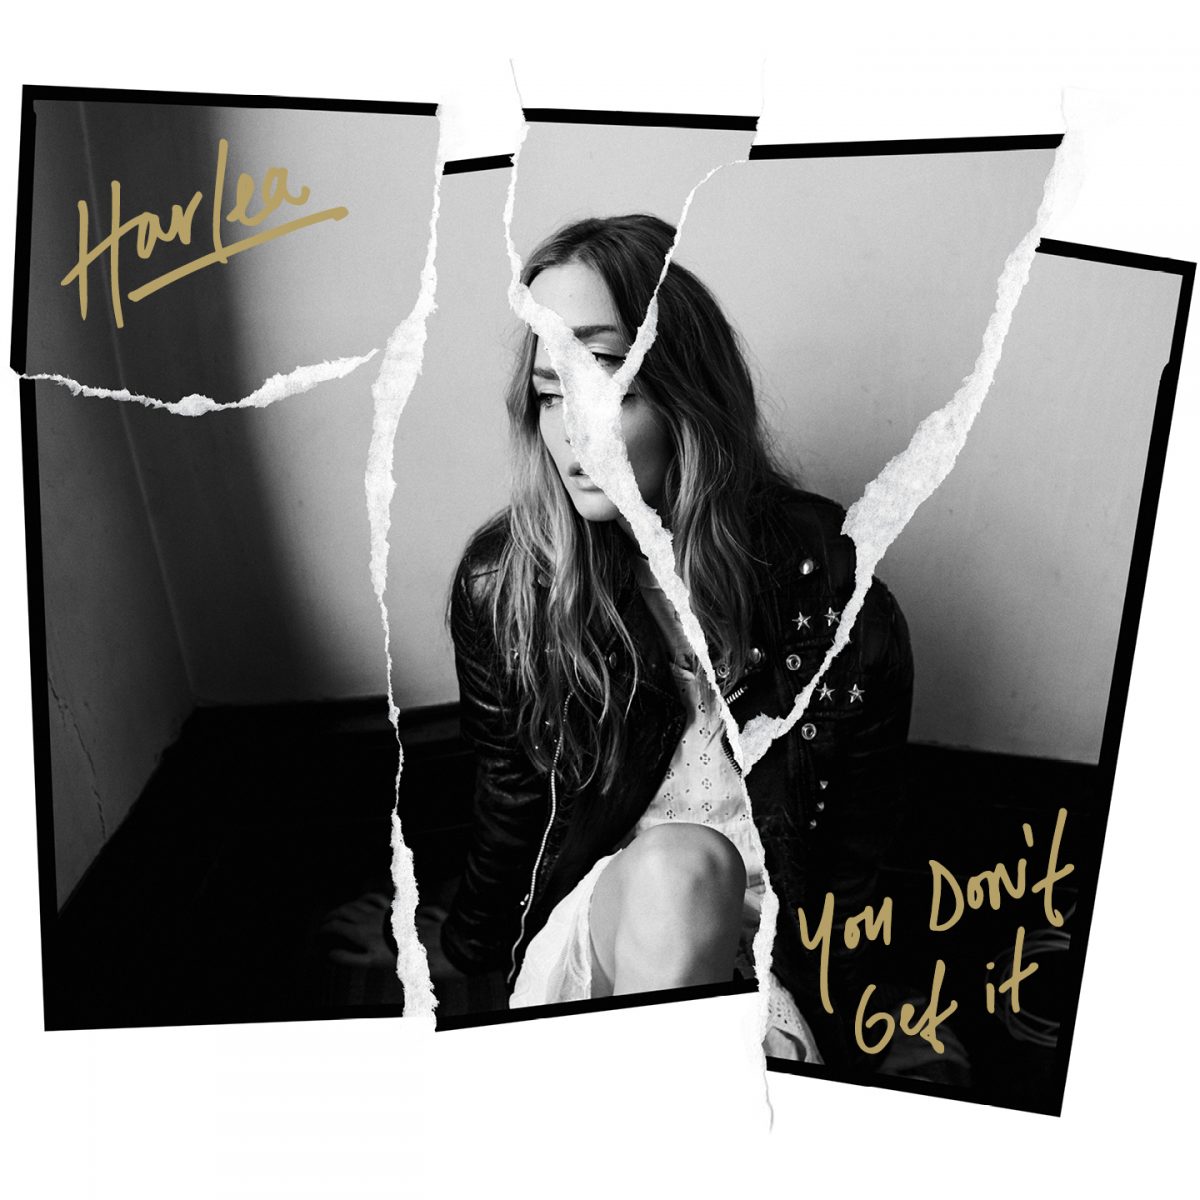 Harlea – You Don’t Get It